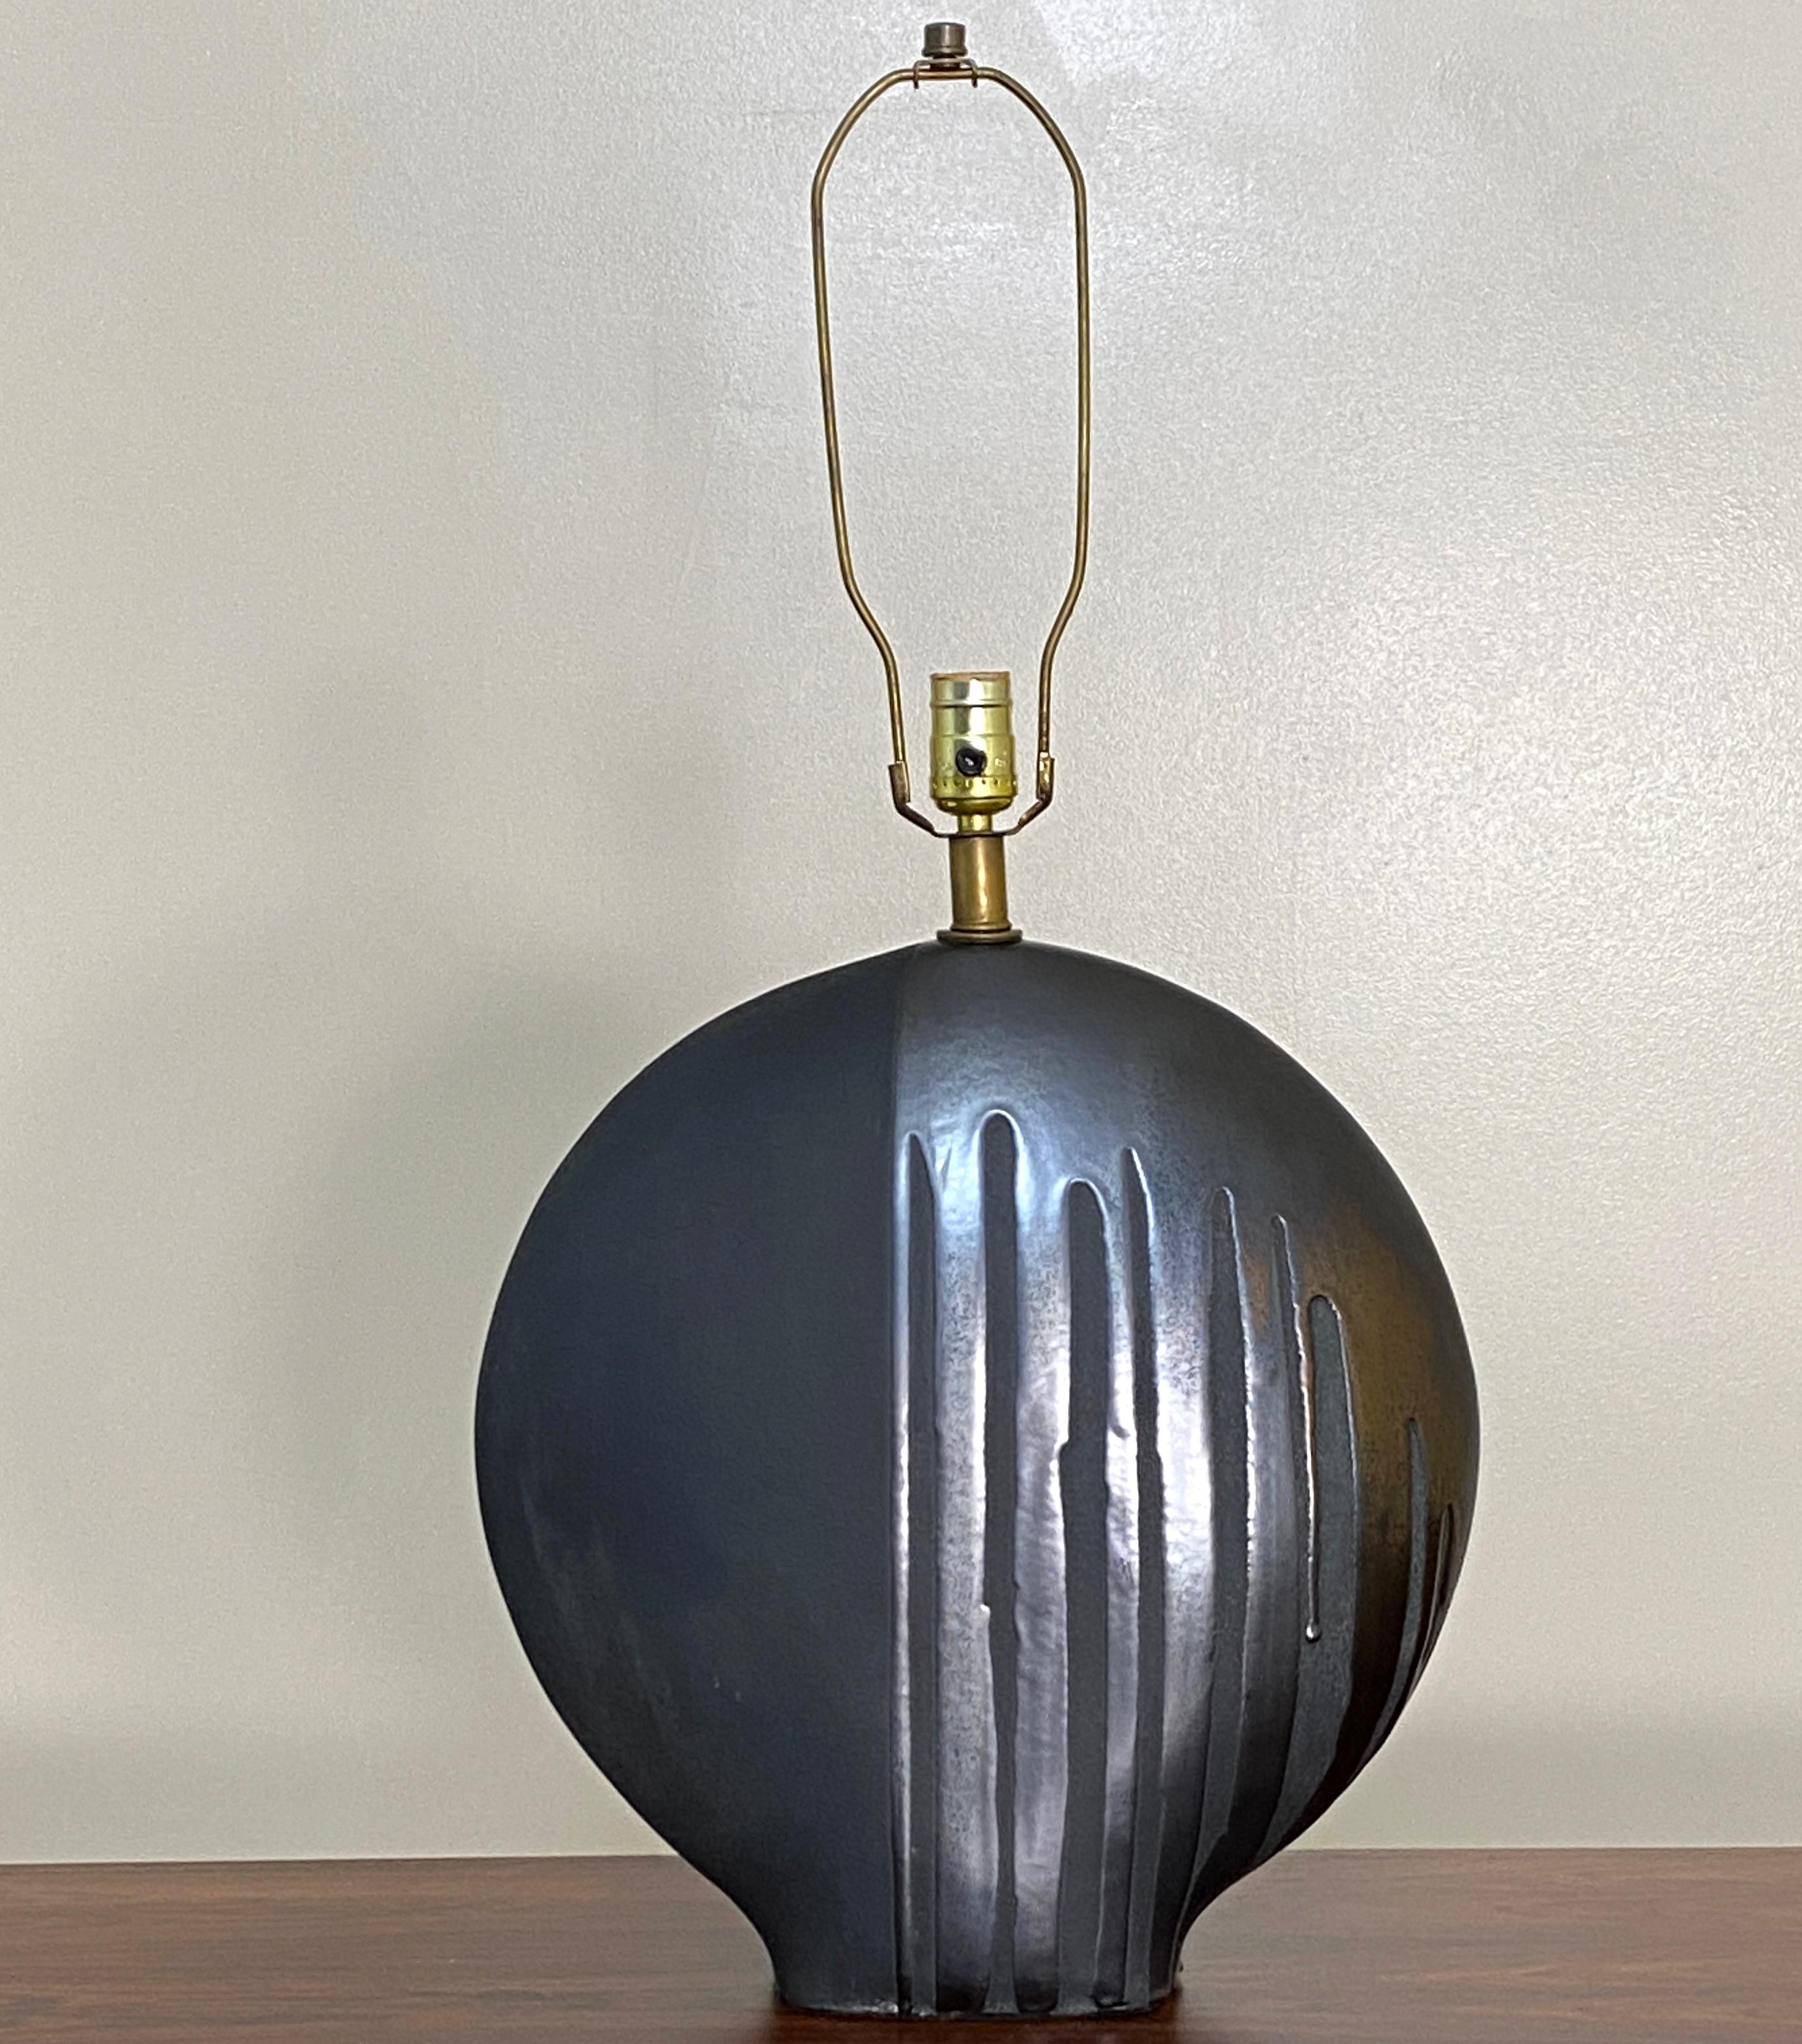 Disc shaped table lamp by Markel. Obsidian glaze over matte finish gives this lamp a very unique appearance. The round nature of a disc with support base to it with its considerable weight make this a lovely designer lamp. In excellent condition